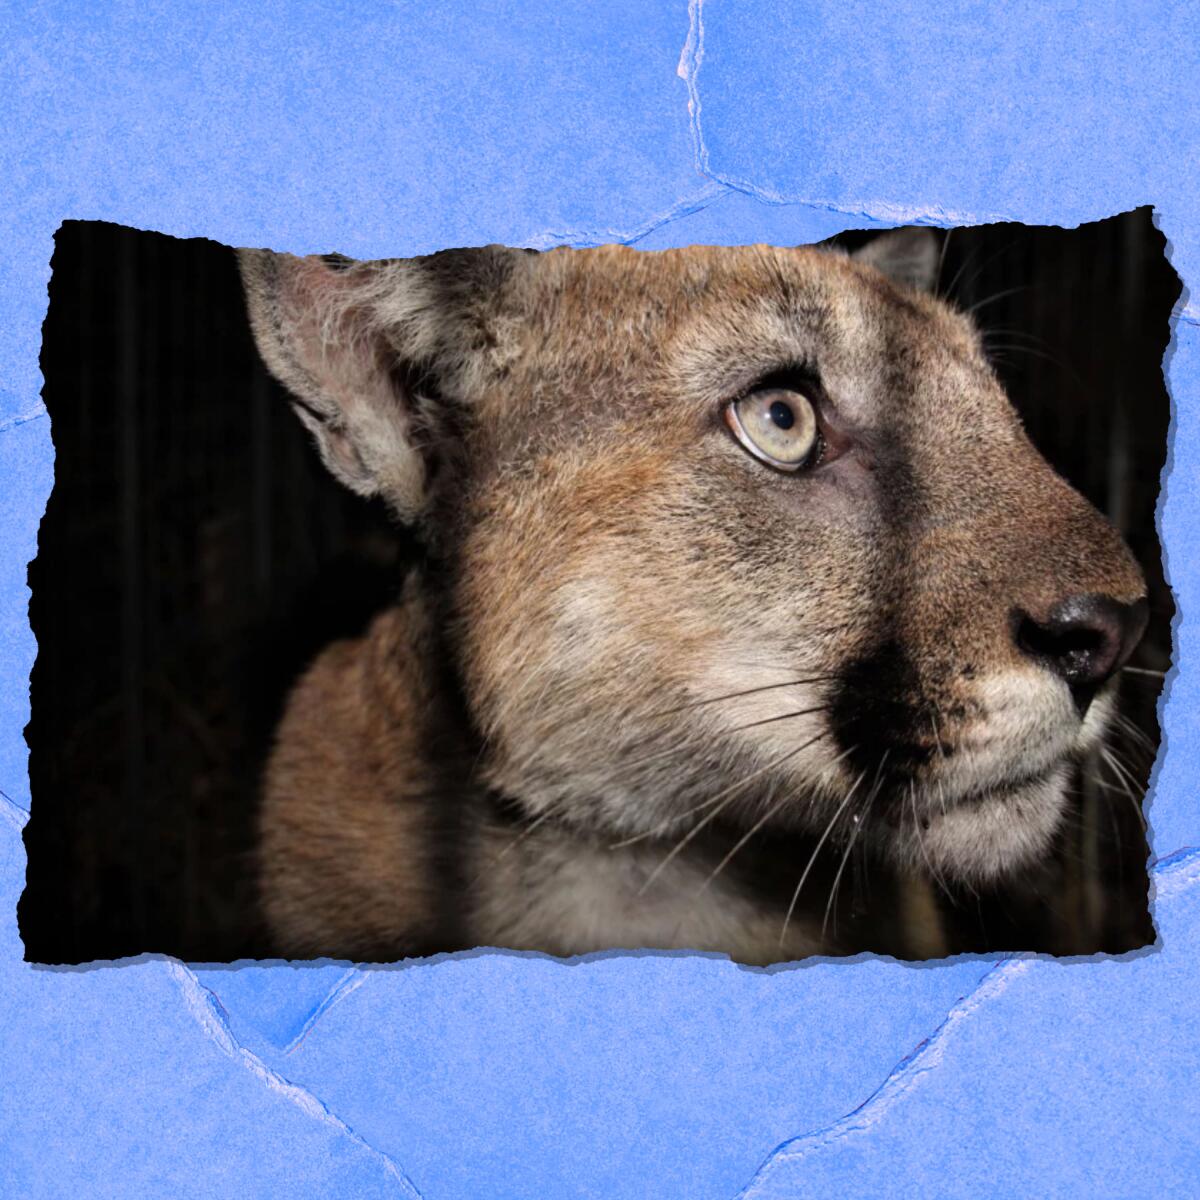 Closeup of a mountain lion behind the bars of a cage.